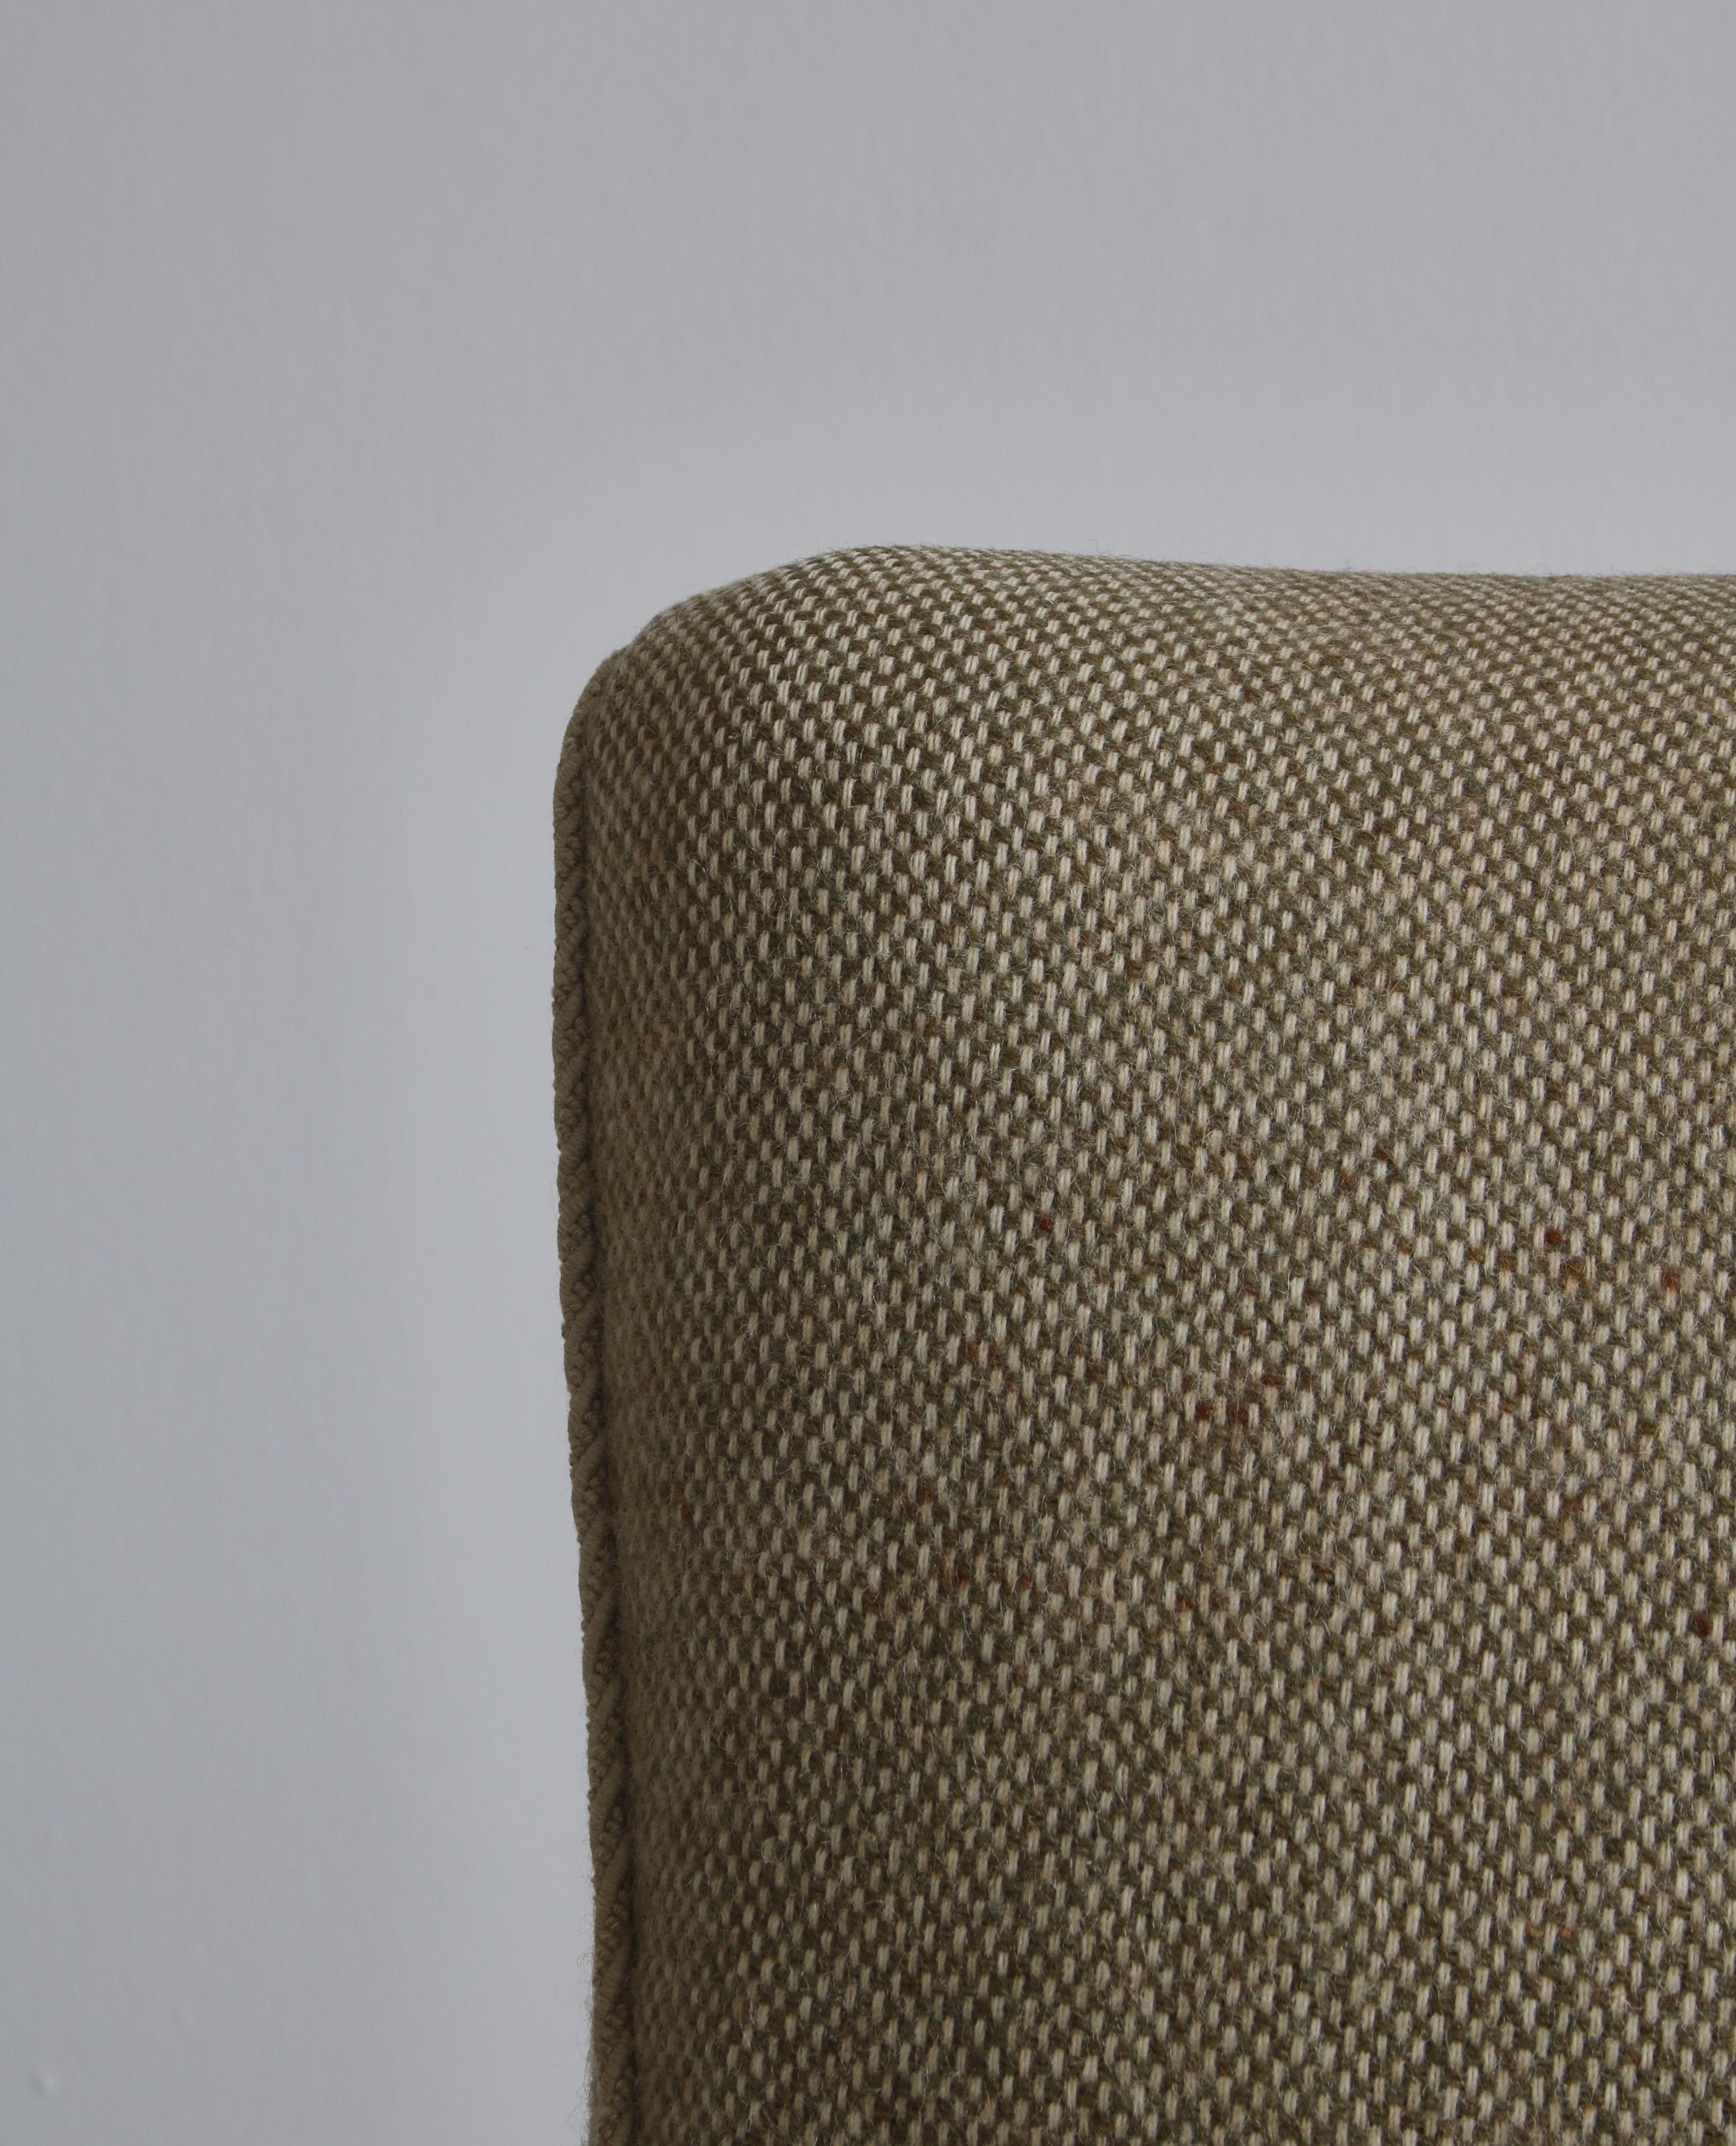 Mid-20th Century Danish Modern Easy Chair in Beech & Wool Upholstery by Hvidt & Mølgaard, 1950s For Sale